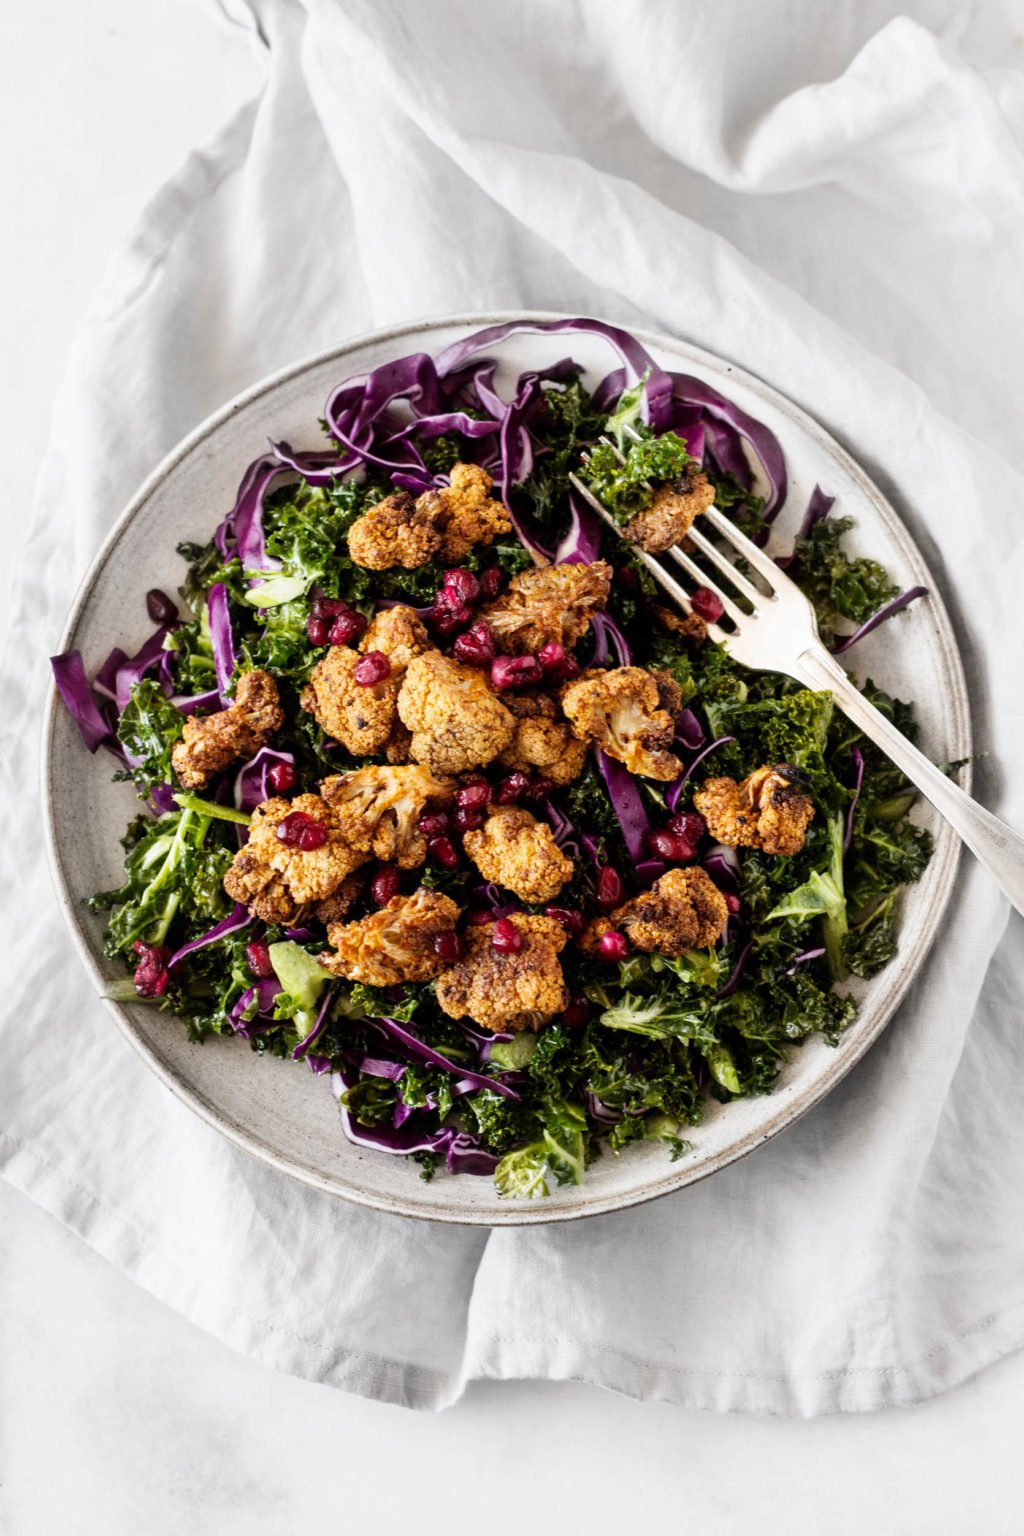 A serving plate is topped with vegan cauliflower pomegranate kale salad—a colorful mix of spice rubbed cauliflower, kale, purple cabbage, and pomegranate seeds.